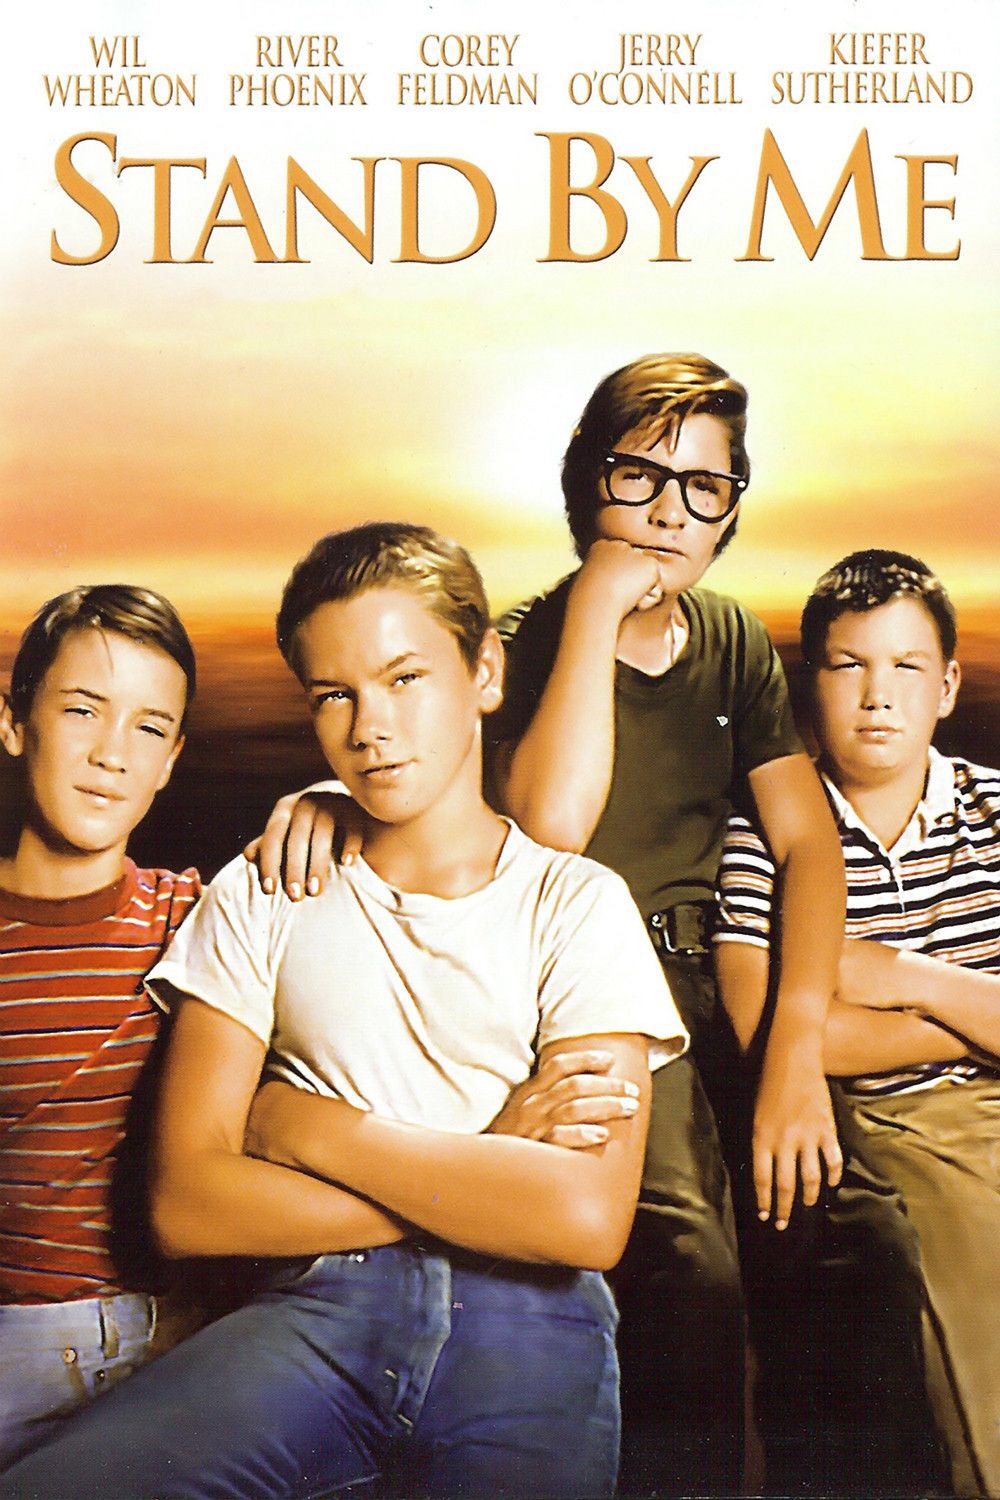 stand by me movie - Wil River Corey Terry Kiefer Wheaton Phoenix Feldman O'Connell Sutherland Stand By Me